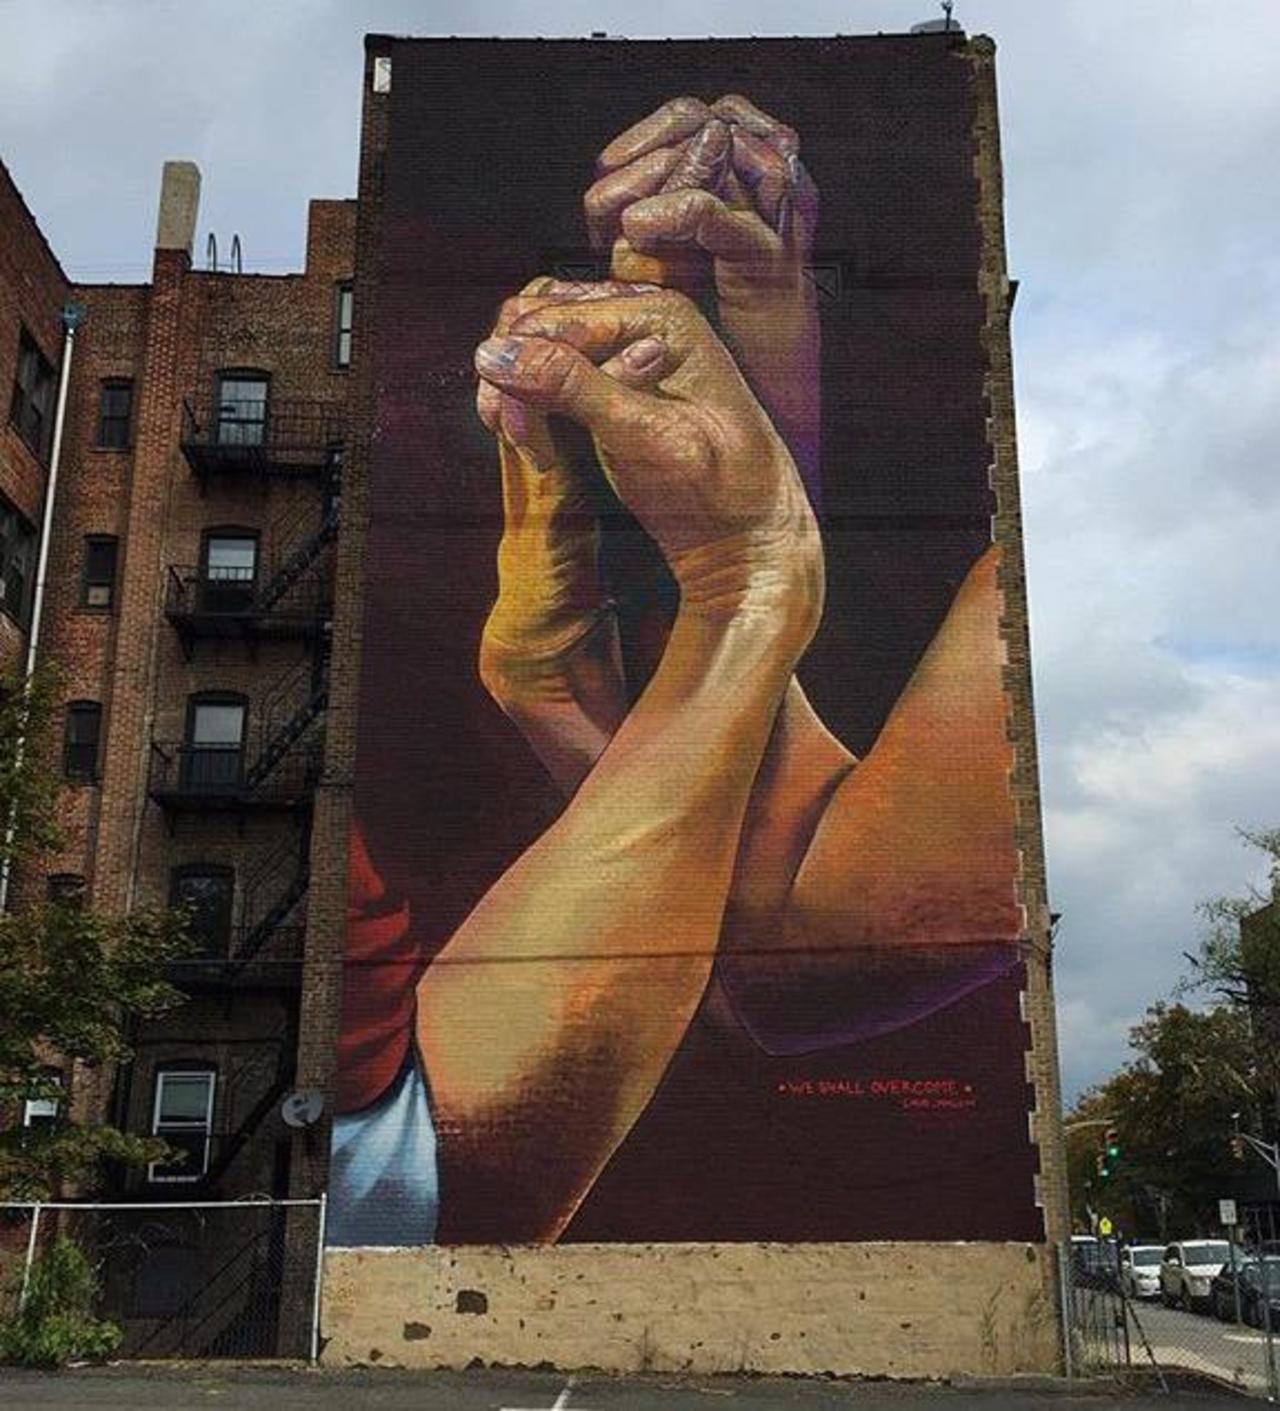 New Street Art by CaseMaclaim in Jersey City for the TheBKcollective 

#art #graffiti #mural #streetart http://t.co/ixr0dXBrYg